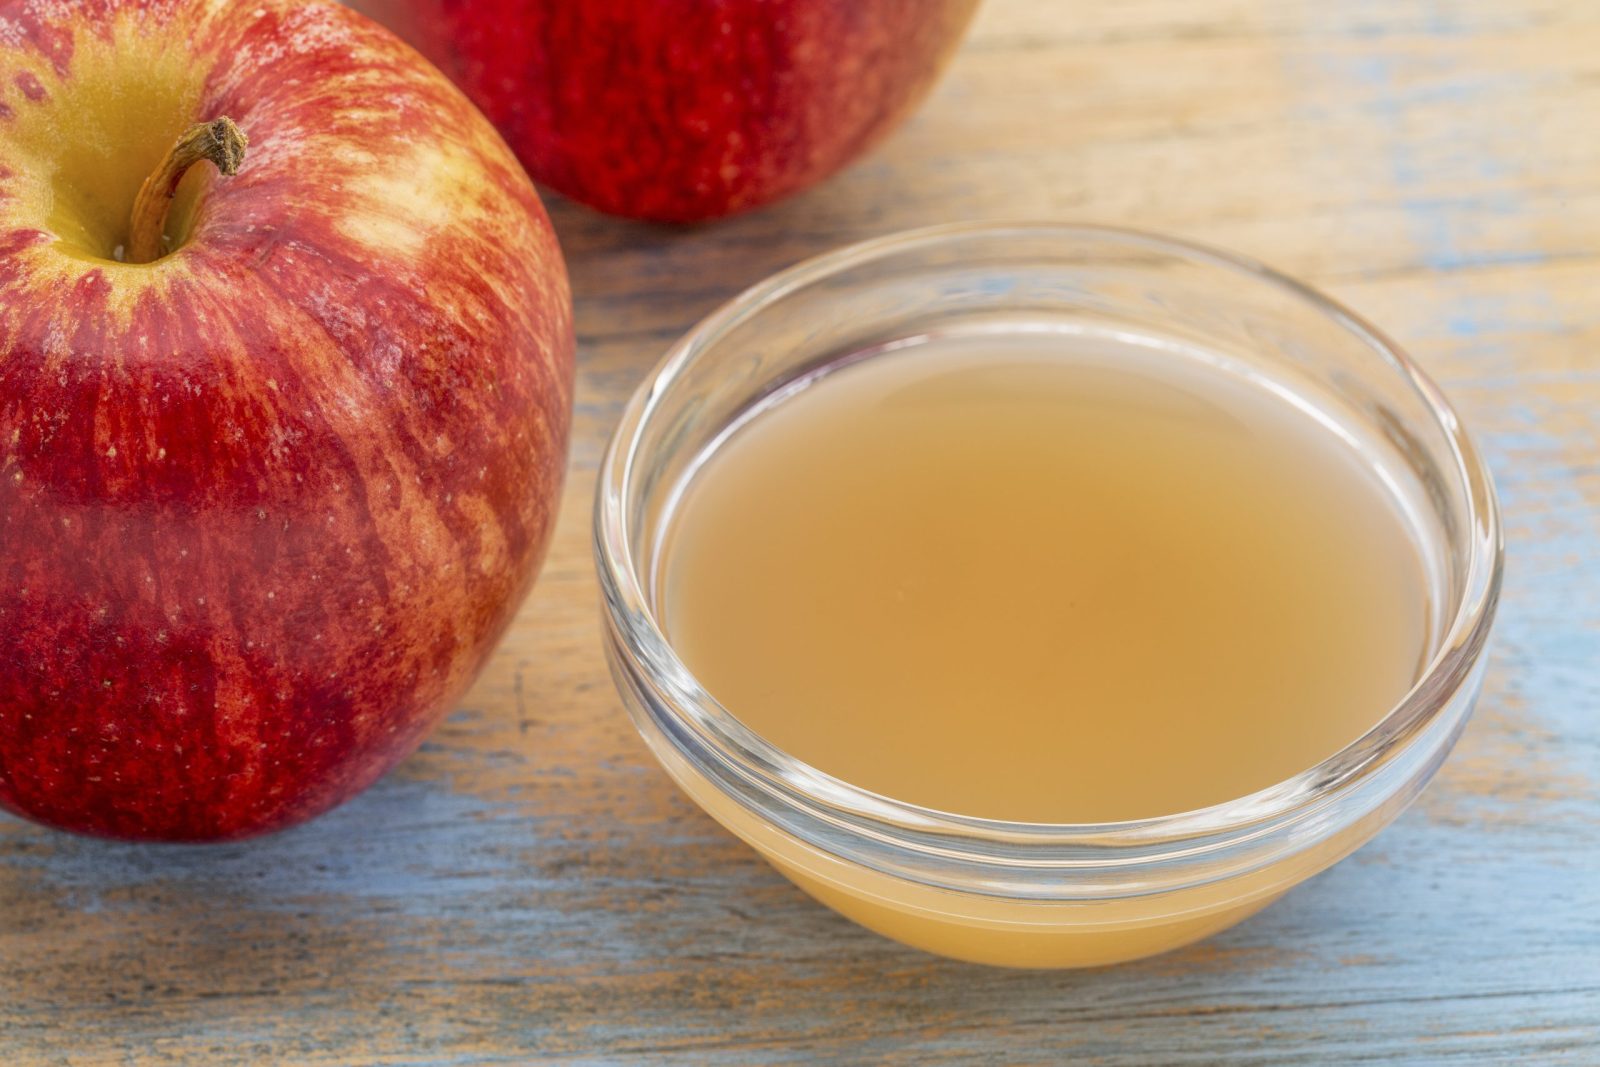 shutterstock_492619195-scaled-e1679009501584.jpgfit16002C1067ssl1 Tips for Using Apple Cider Vinegar to Treat Chronic Yeast Overgrowth (Candida)